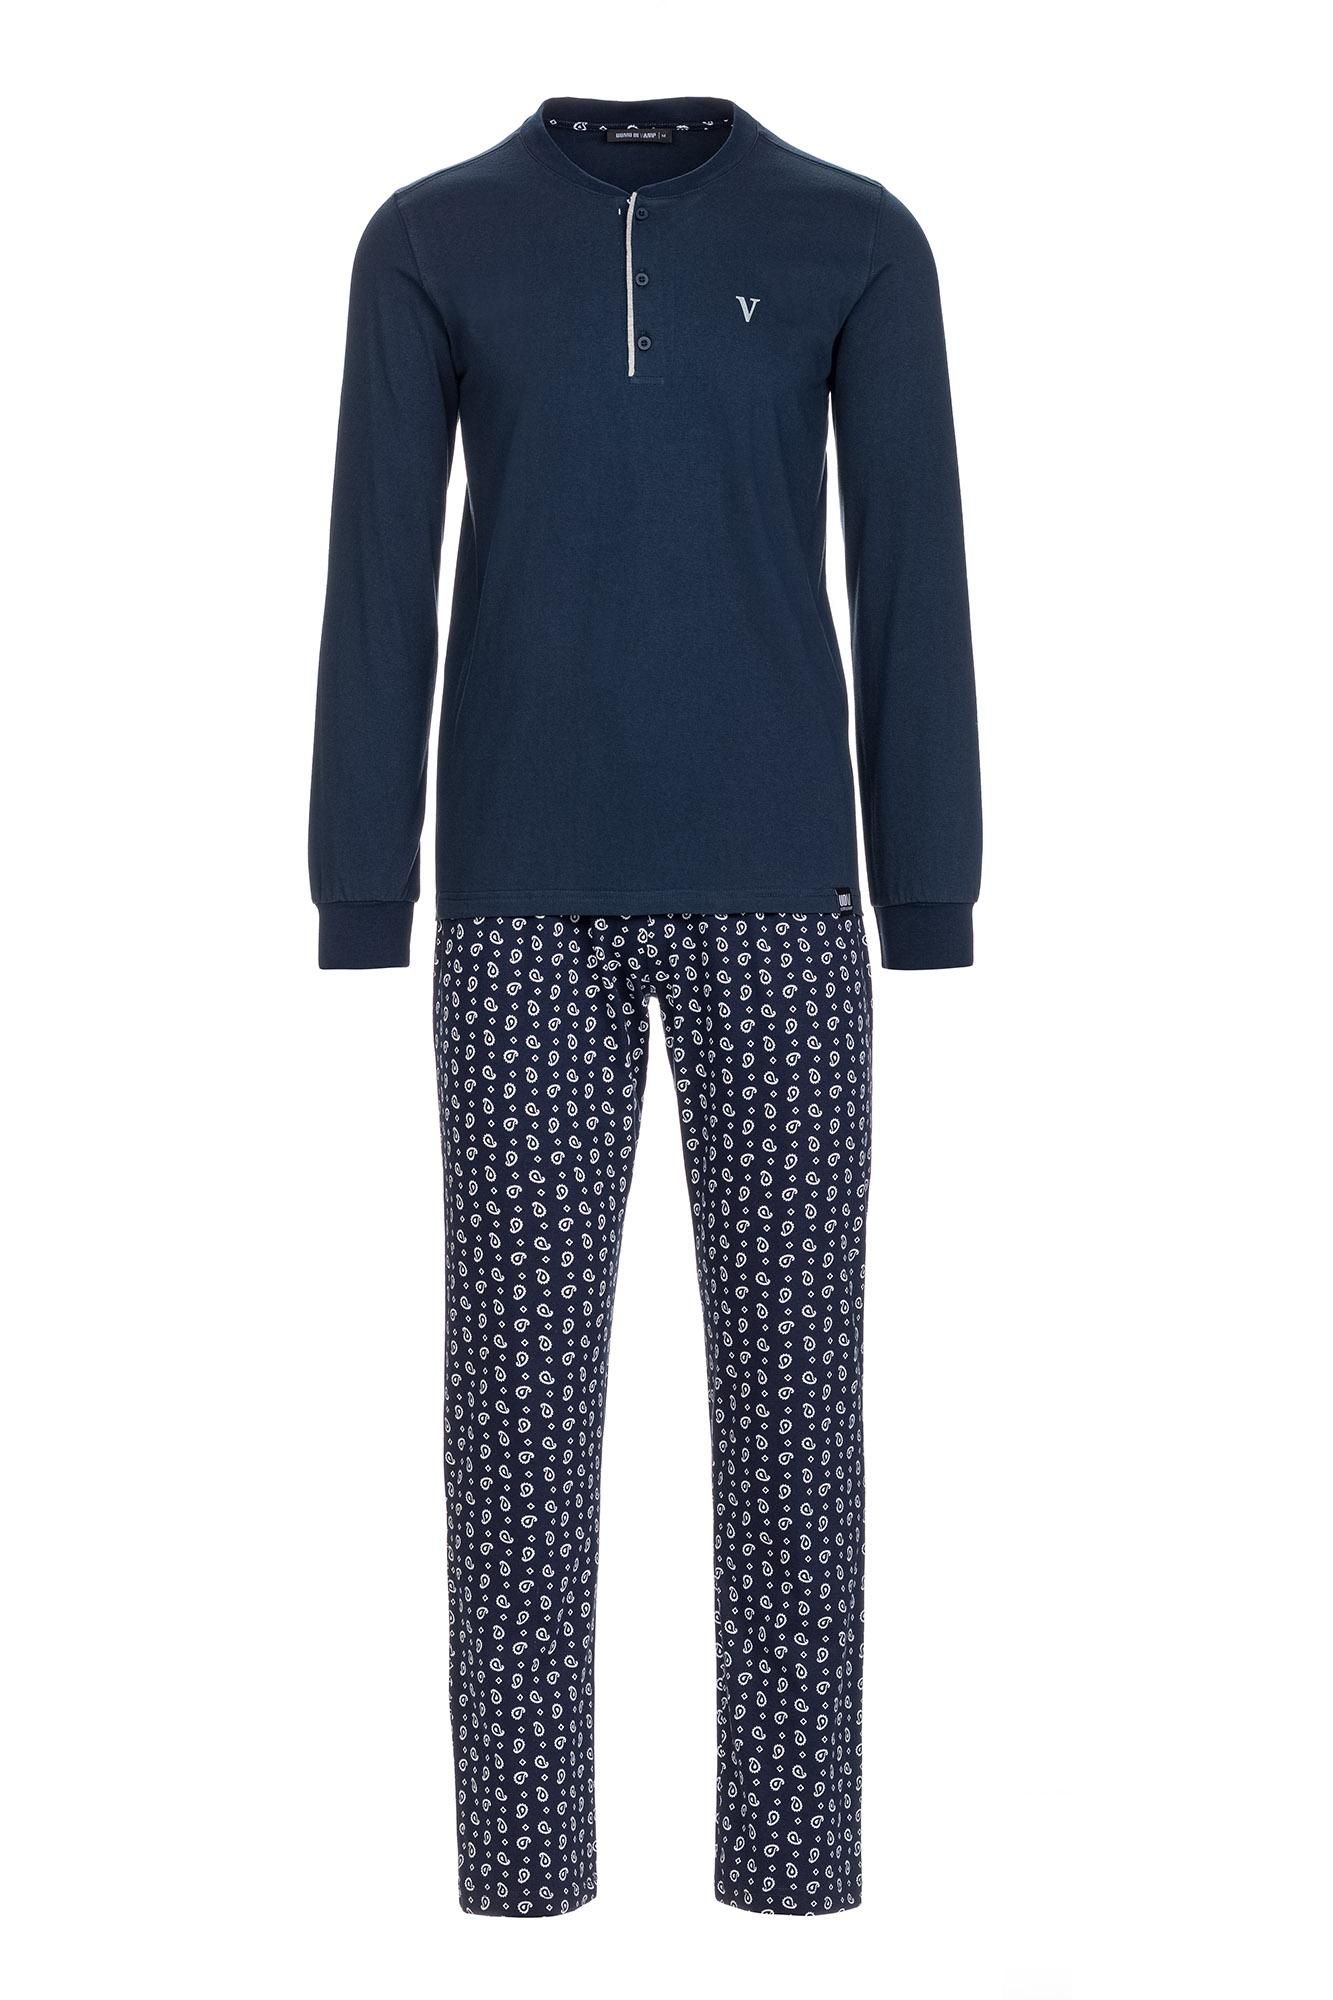 Men’s Patterned Pyjamas with Button Placket